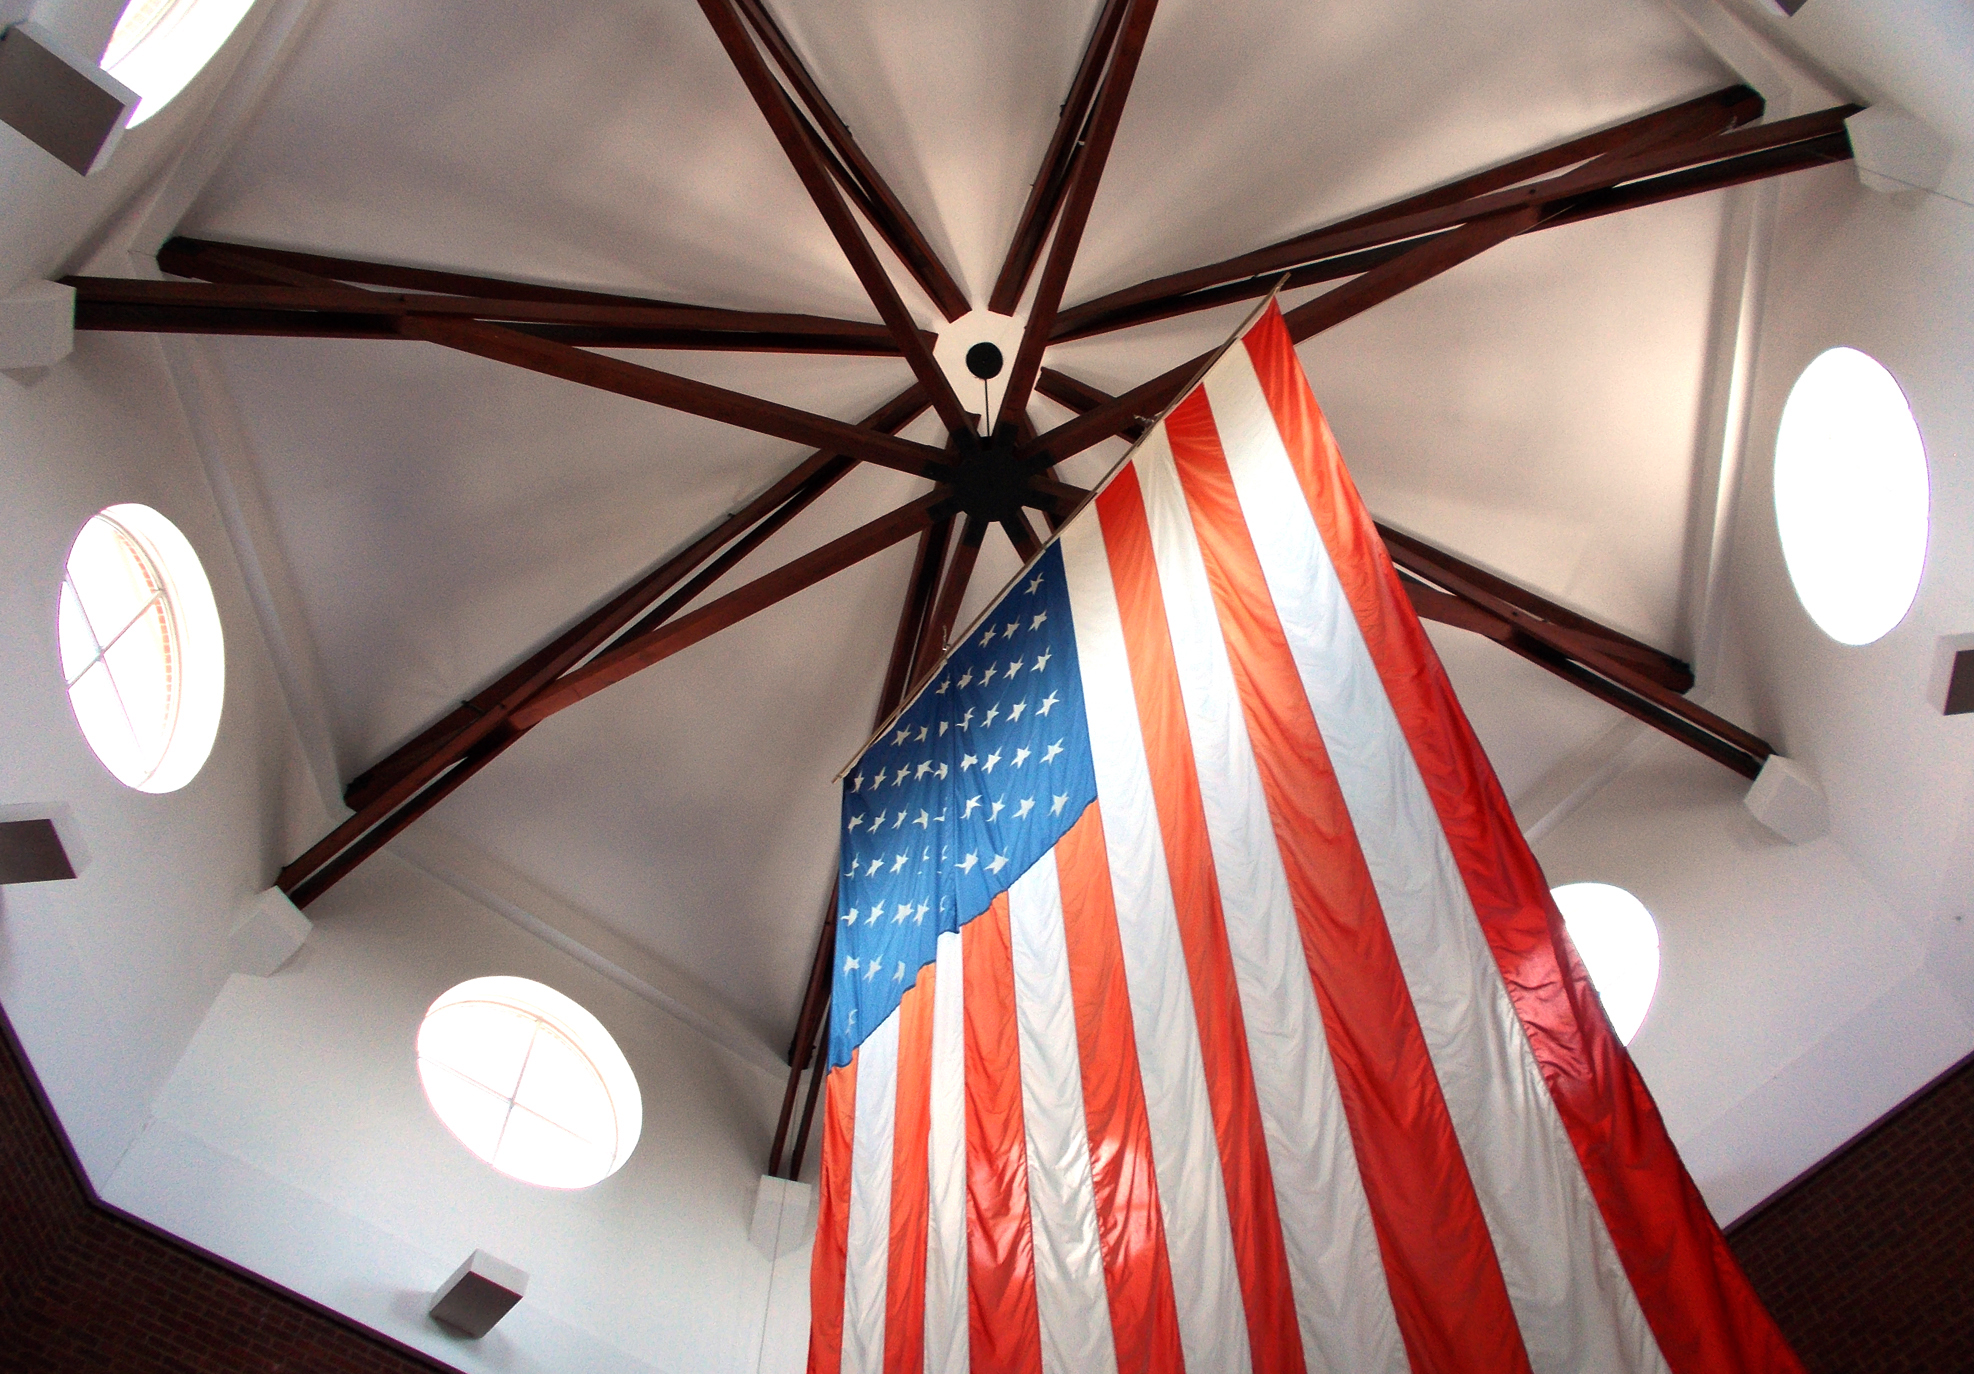 FLAG HANGING FROM CEILING